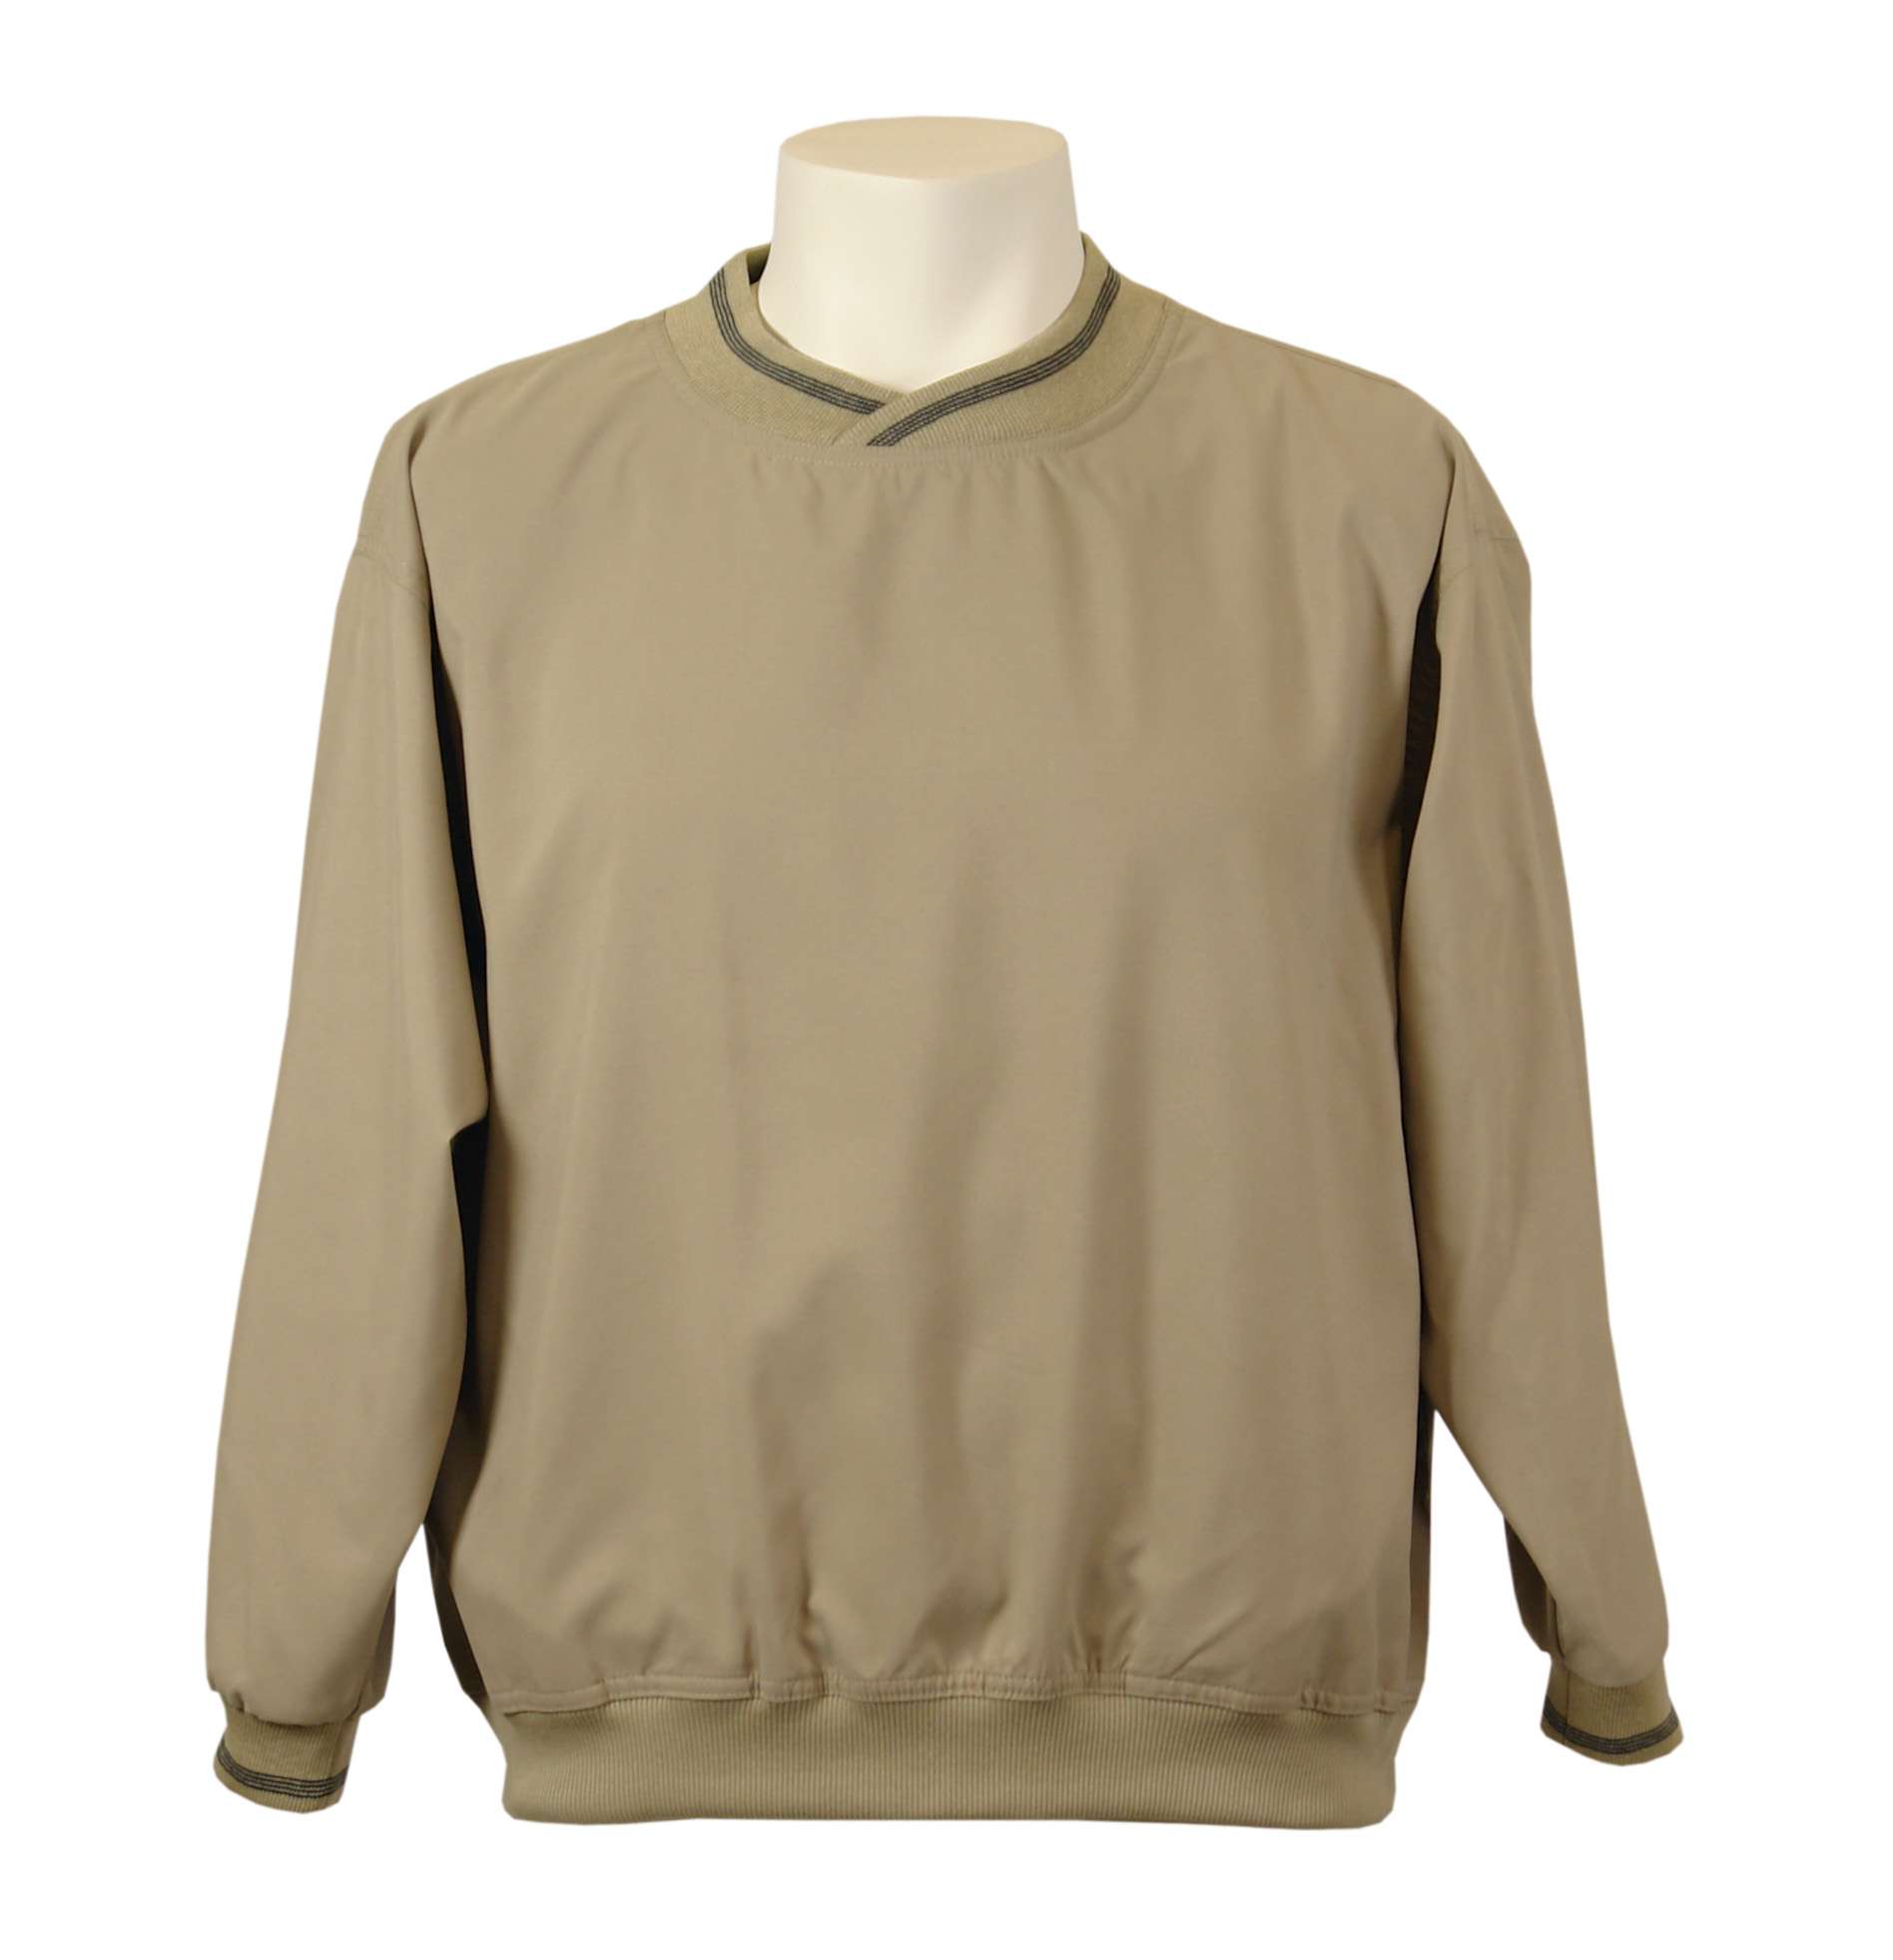 9013-MFI Microfiber Windshirt Pullover - WINDSHIRTS - PRODUCTS